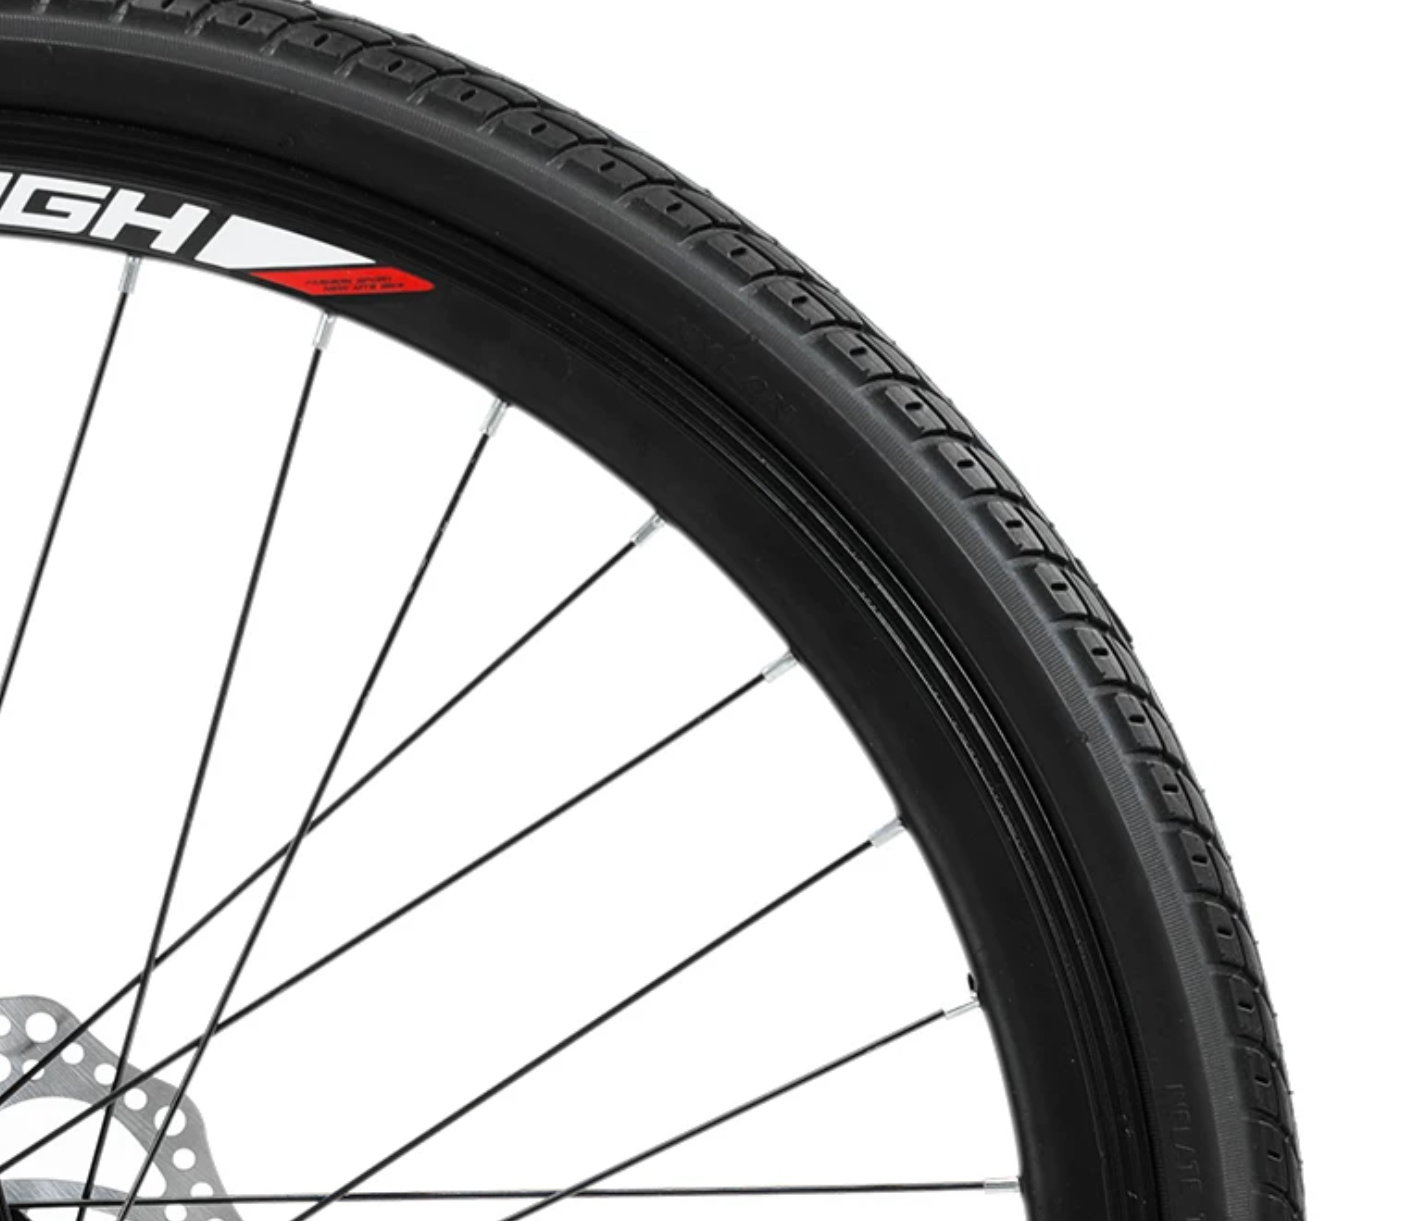 what is this tire size, if not 700c? Bike Forums